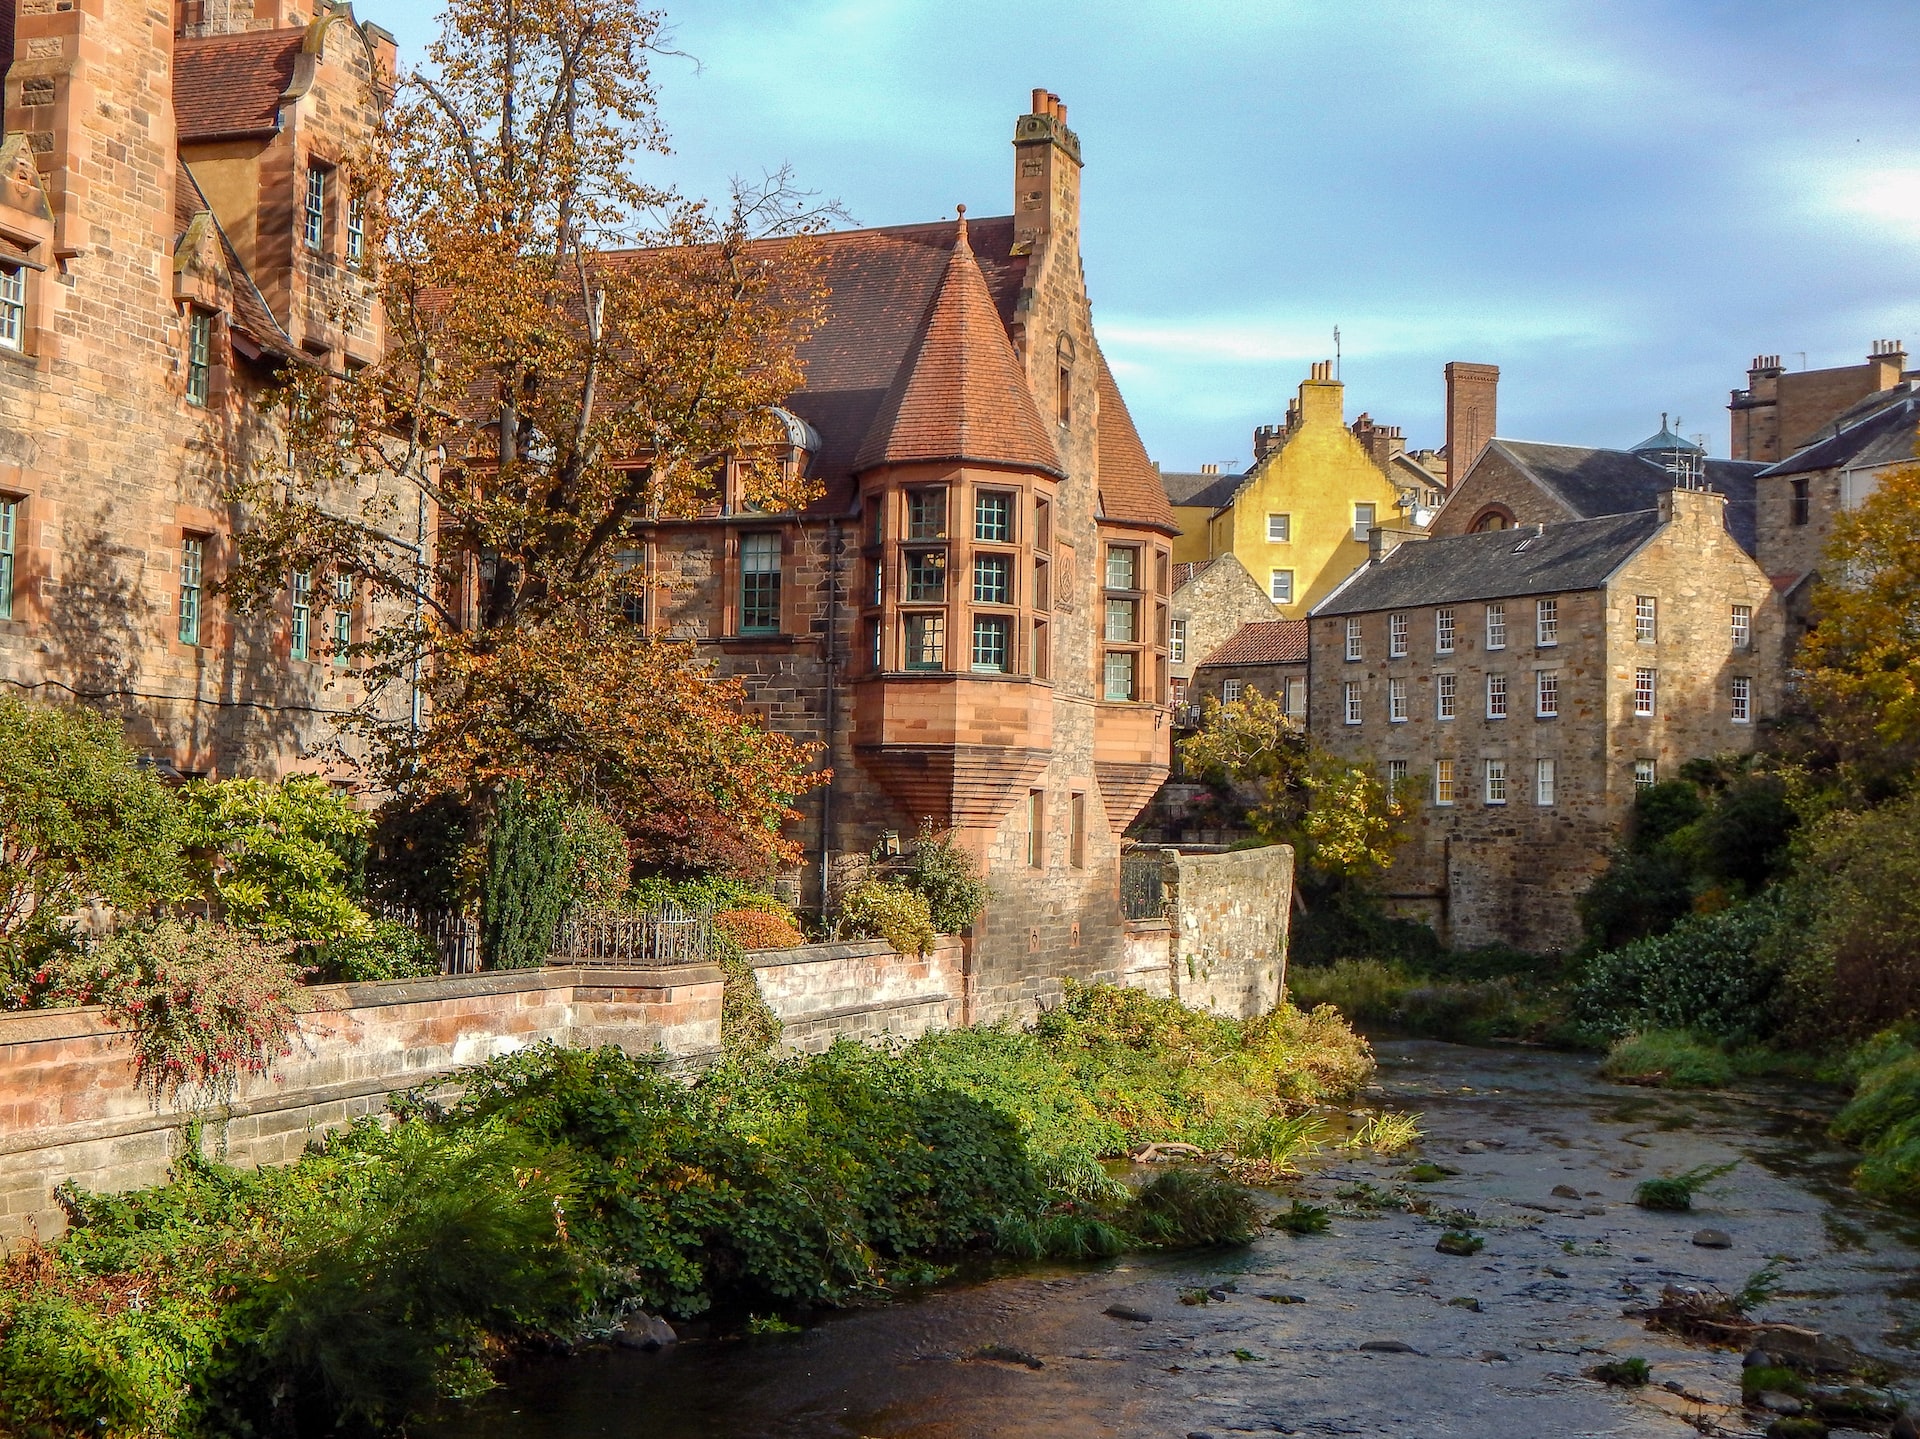 Registers of Scotland: Modest annual growth in Scottish property prices